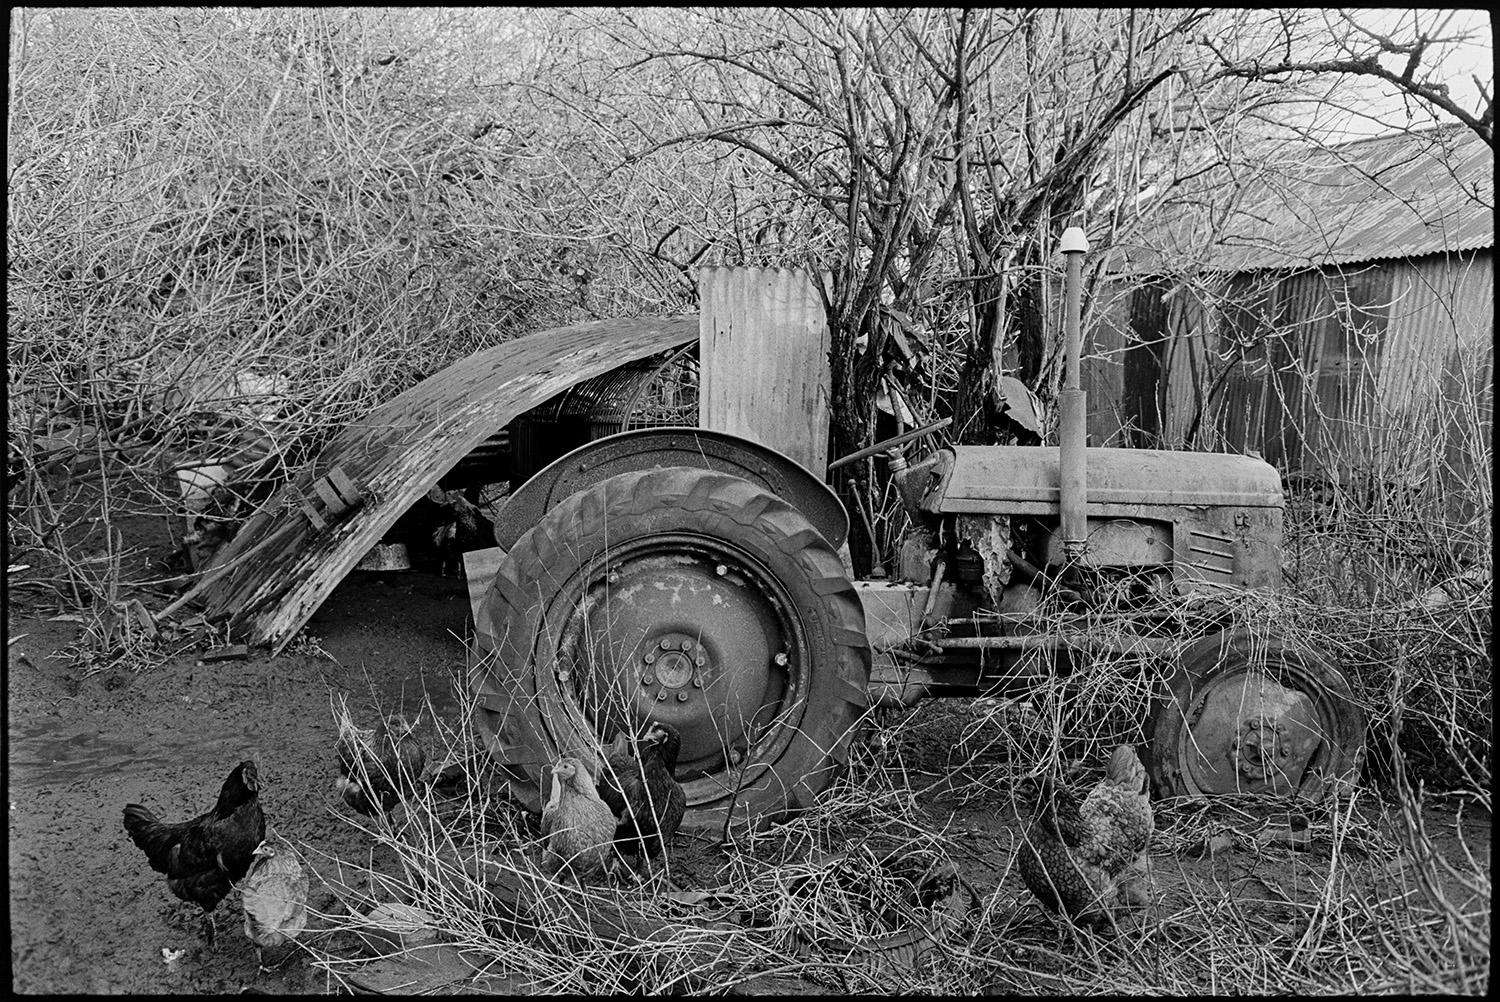 Mucky farmyard, geese, cows, mud, snowdrops in old orchard, tractor. 
[Chickens by a tractor and corrugated iron barn in a muddy farmyard at Cuppers Piece, Beaford. Sheets of corrugated iron are stacked against a tree in the background.]